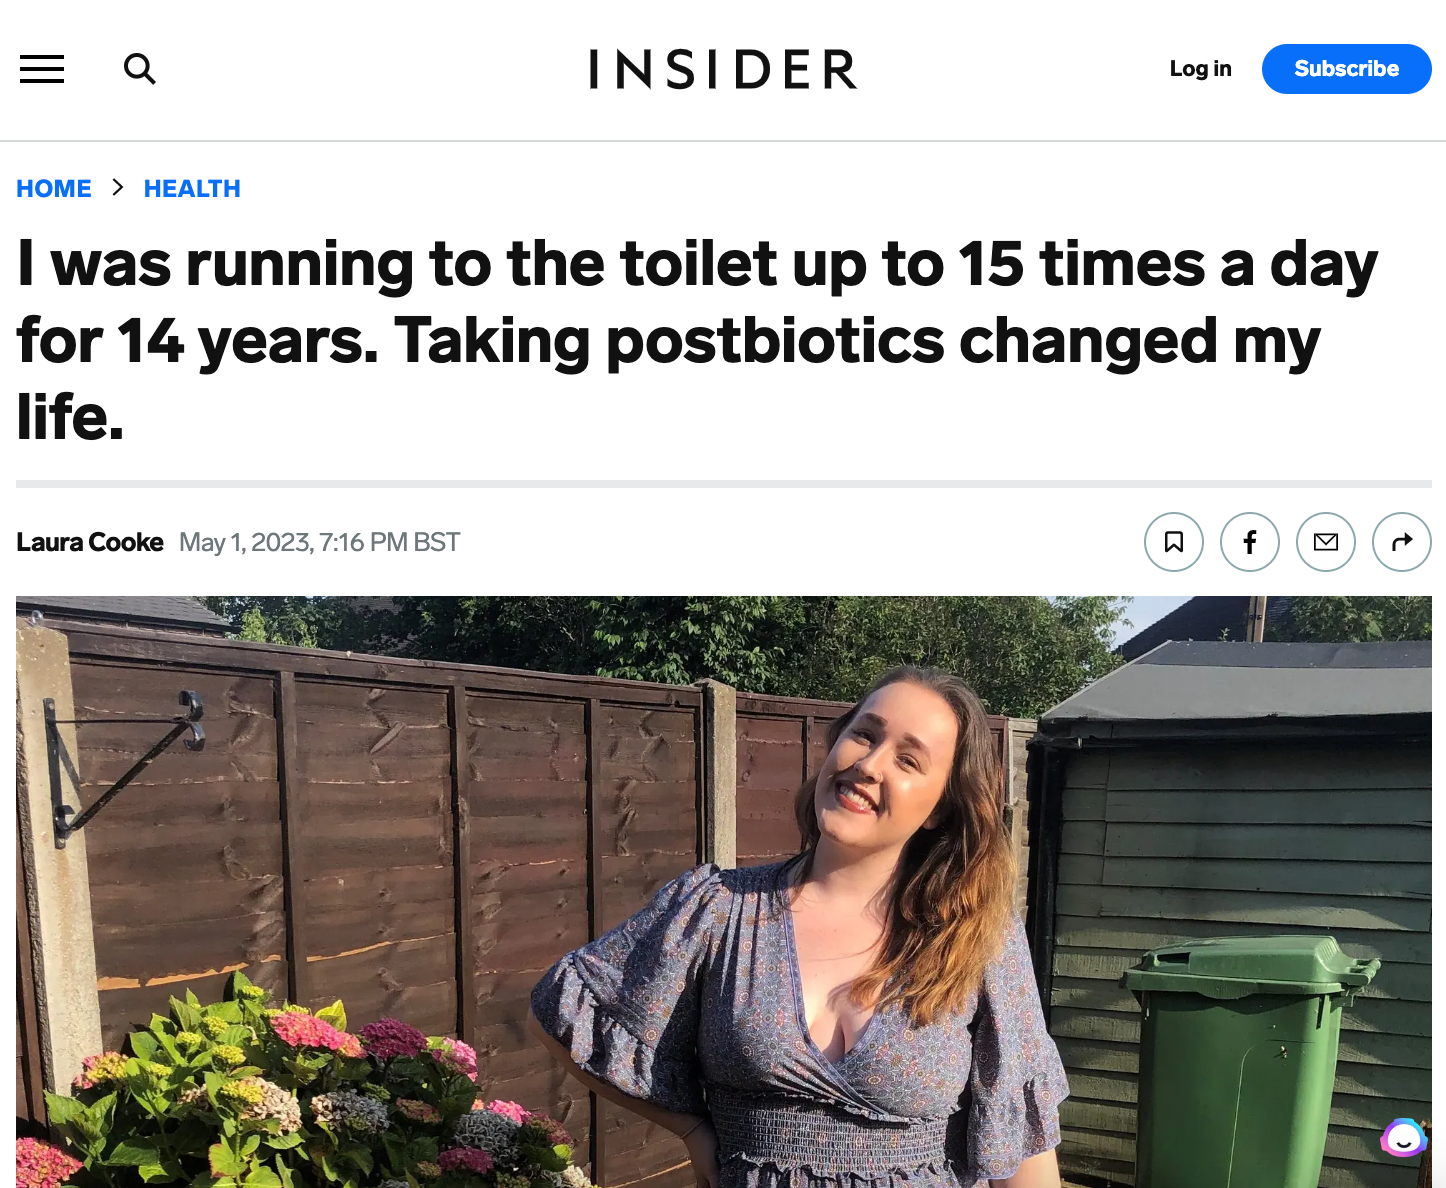 IBS Story: I was running to the toilet up to 15 times a day for 14 years. Taking Gut Wealth postbiotics changed my life.